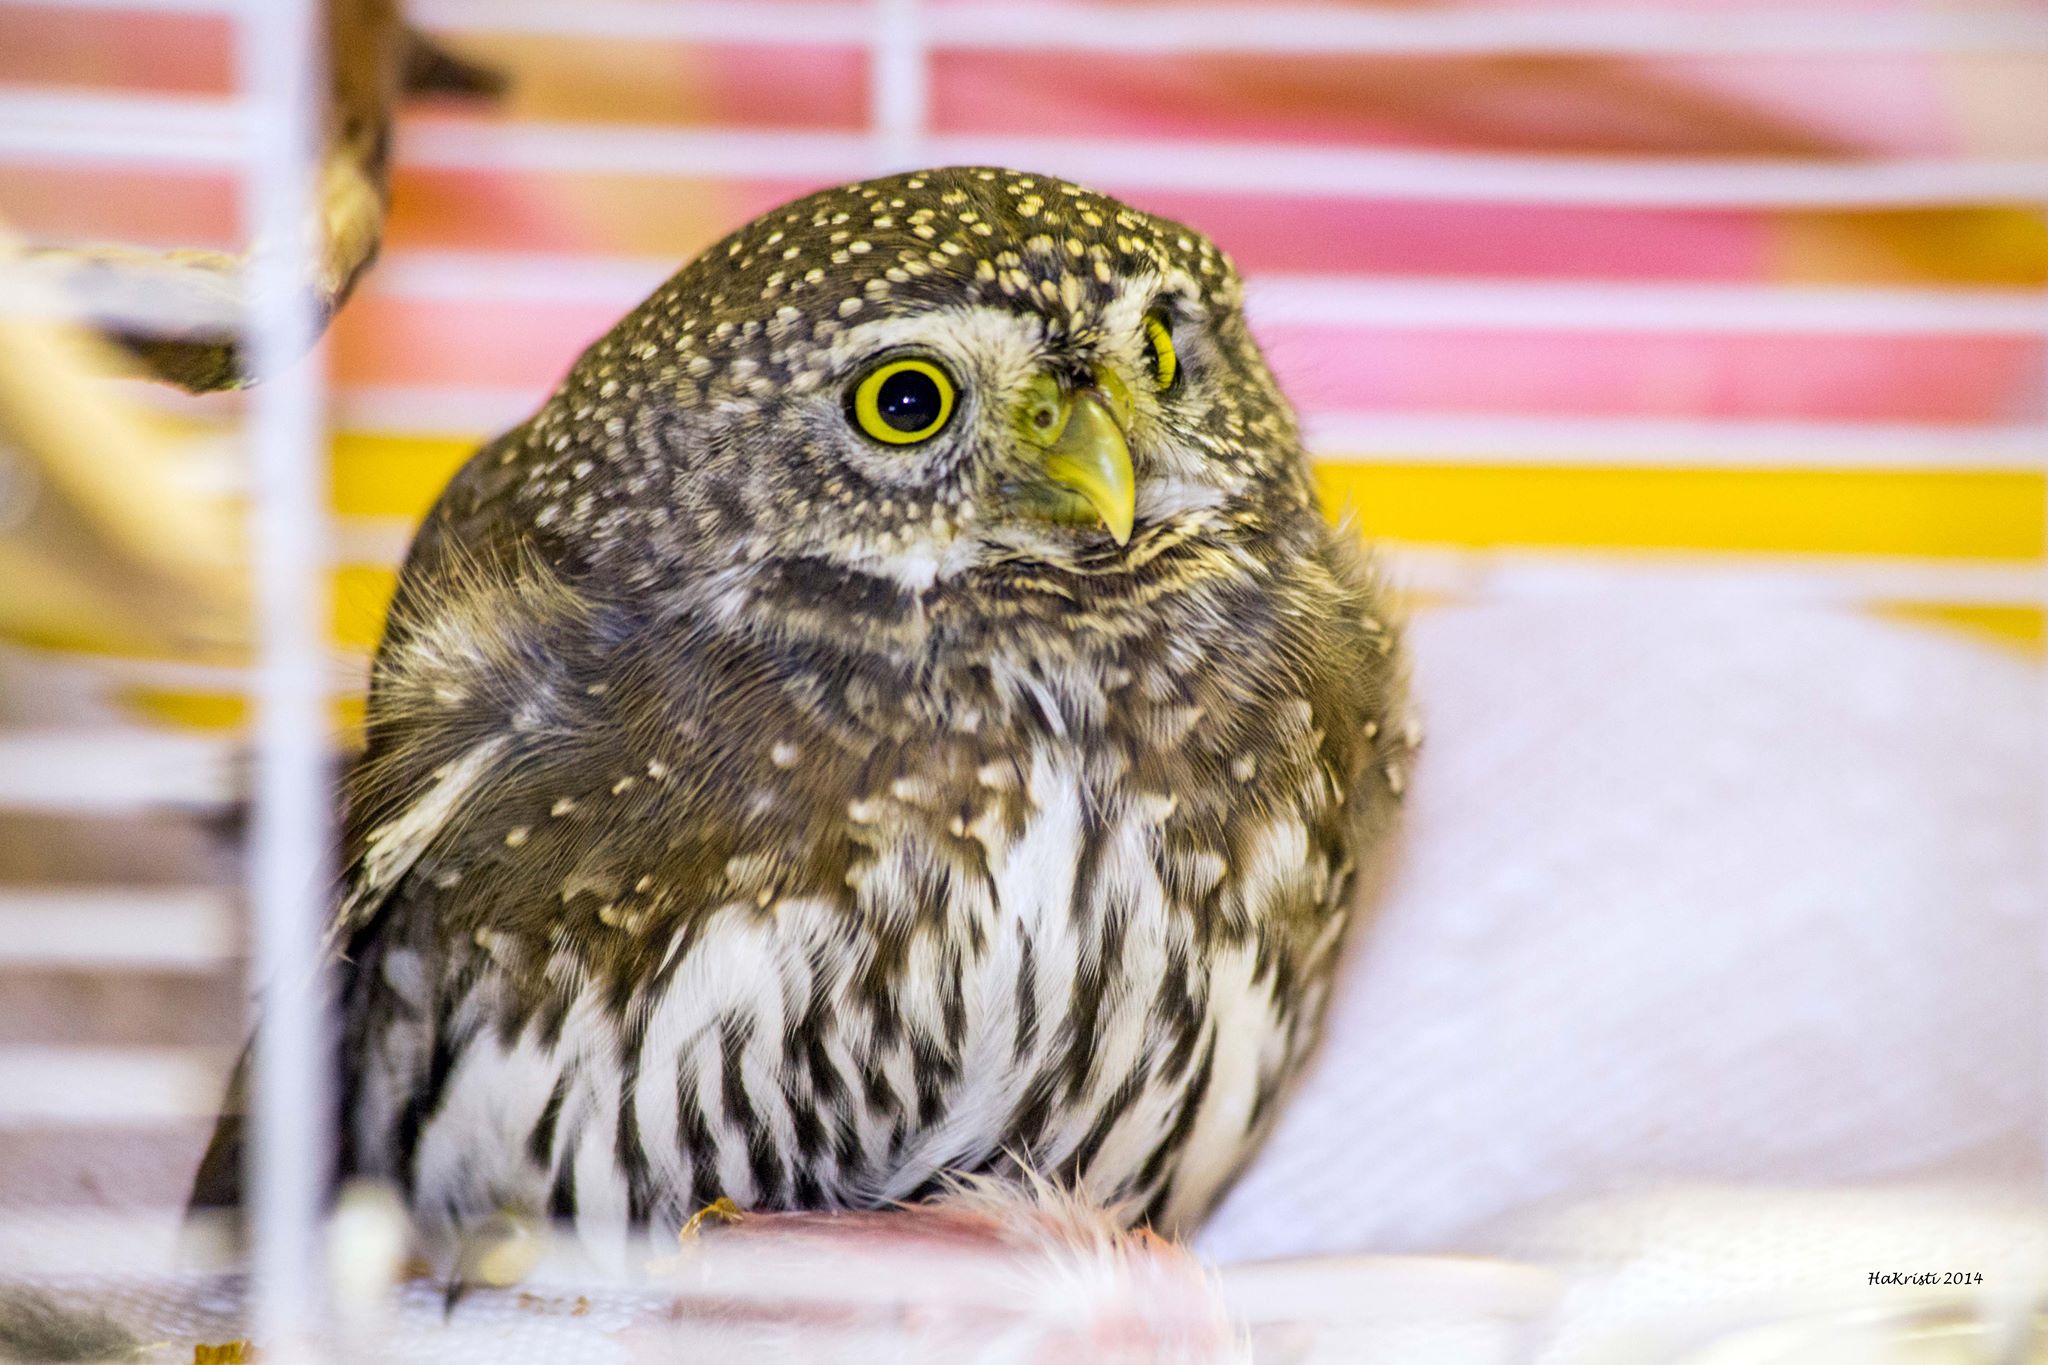 Pygmy Owl in Care